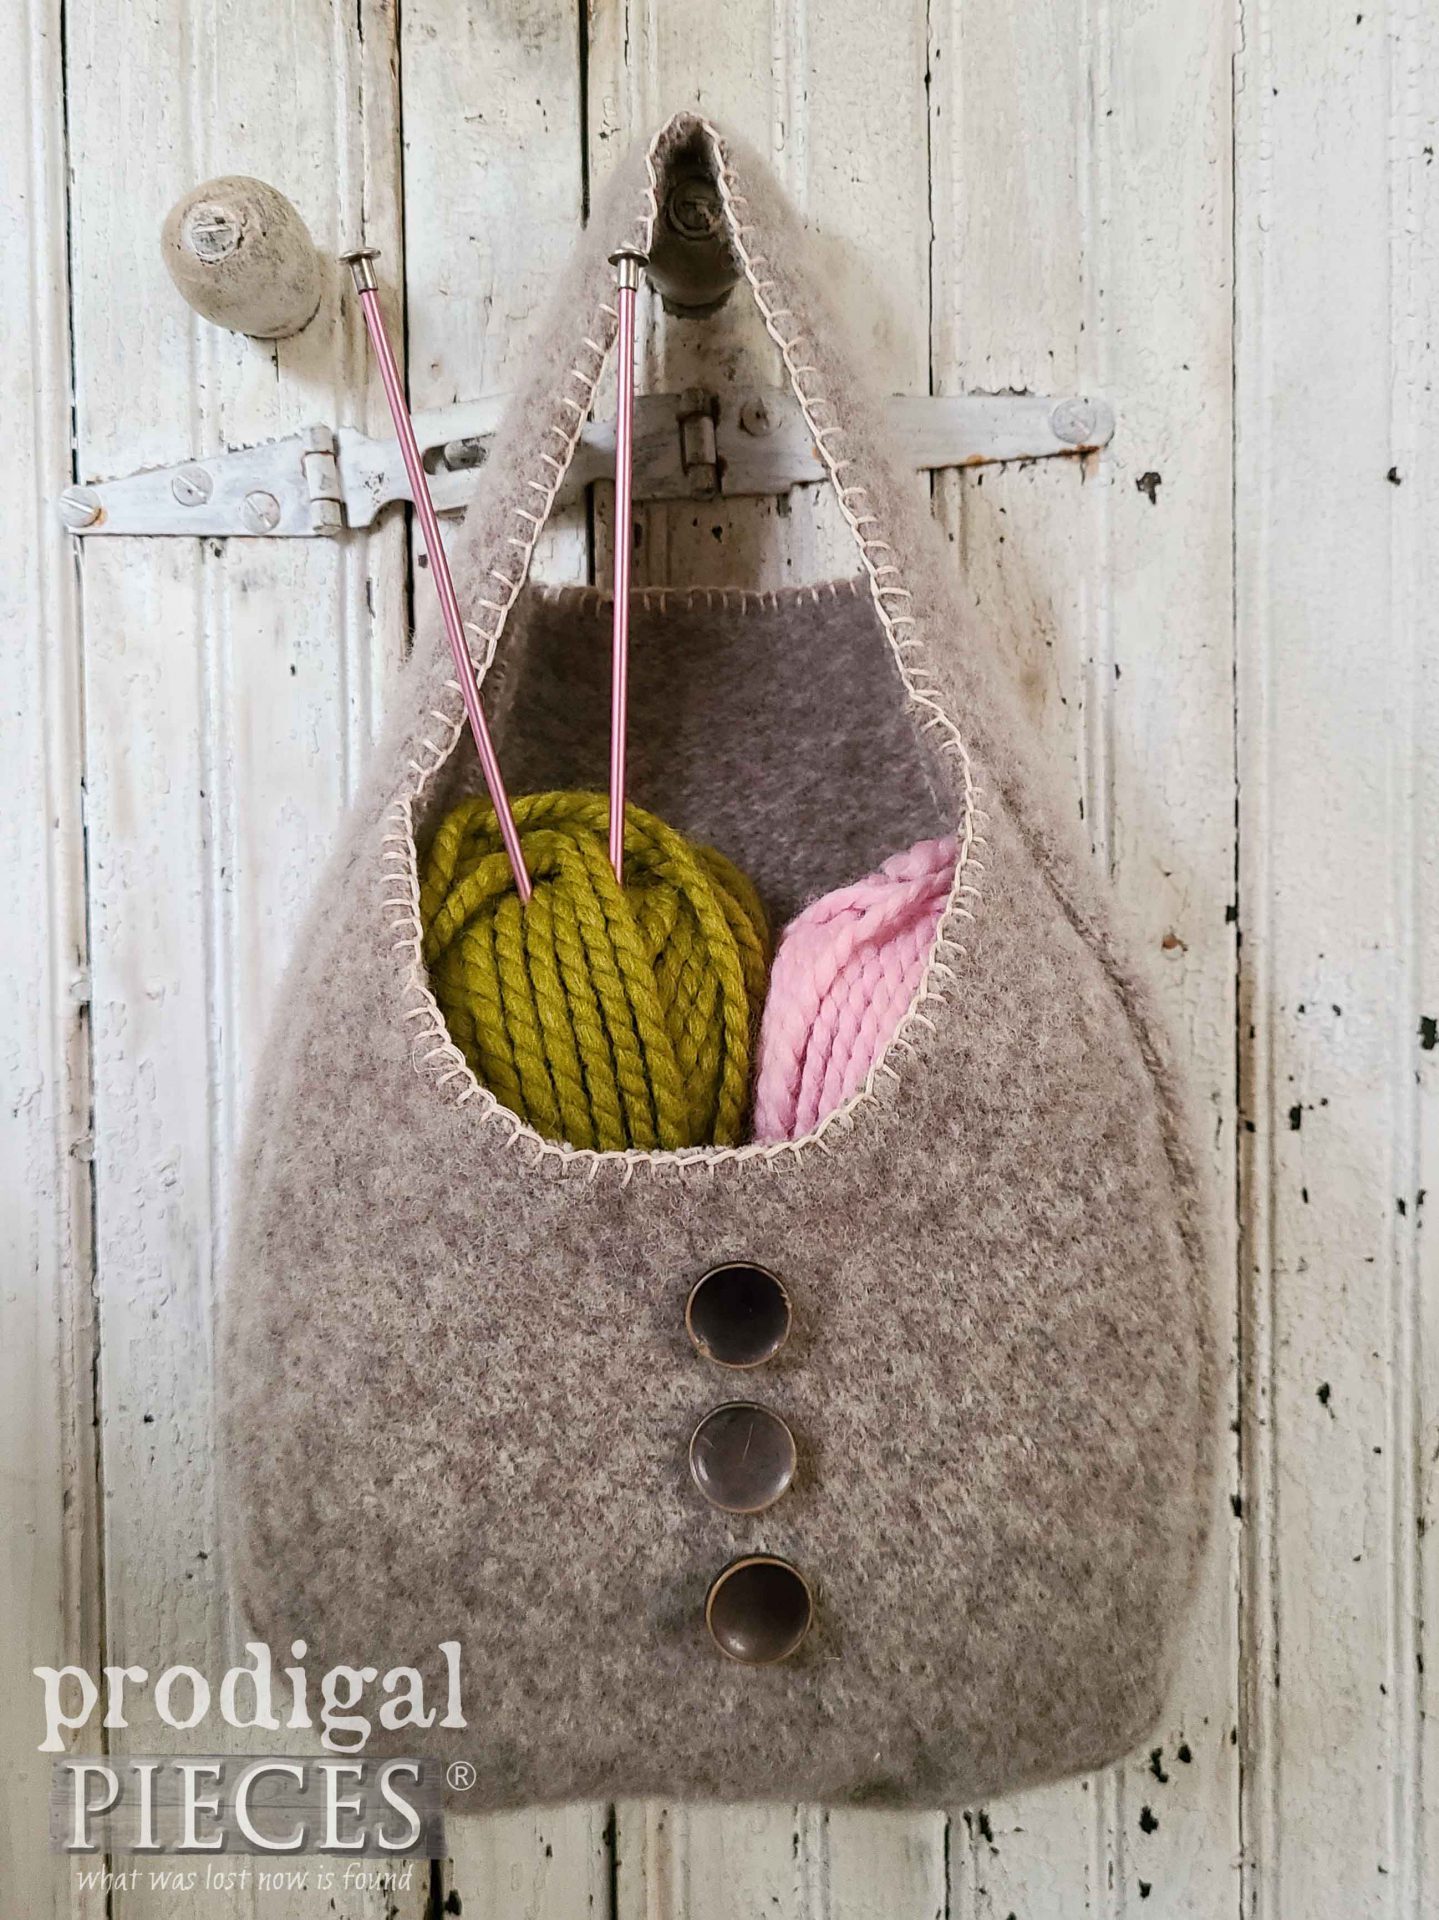 Felted Brown Wool with White Trim and Buttons by Larissa of Prodigal Pieces | prodigalpieces.com #prodigalpieces #felted #bag #storage #knit #crochet